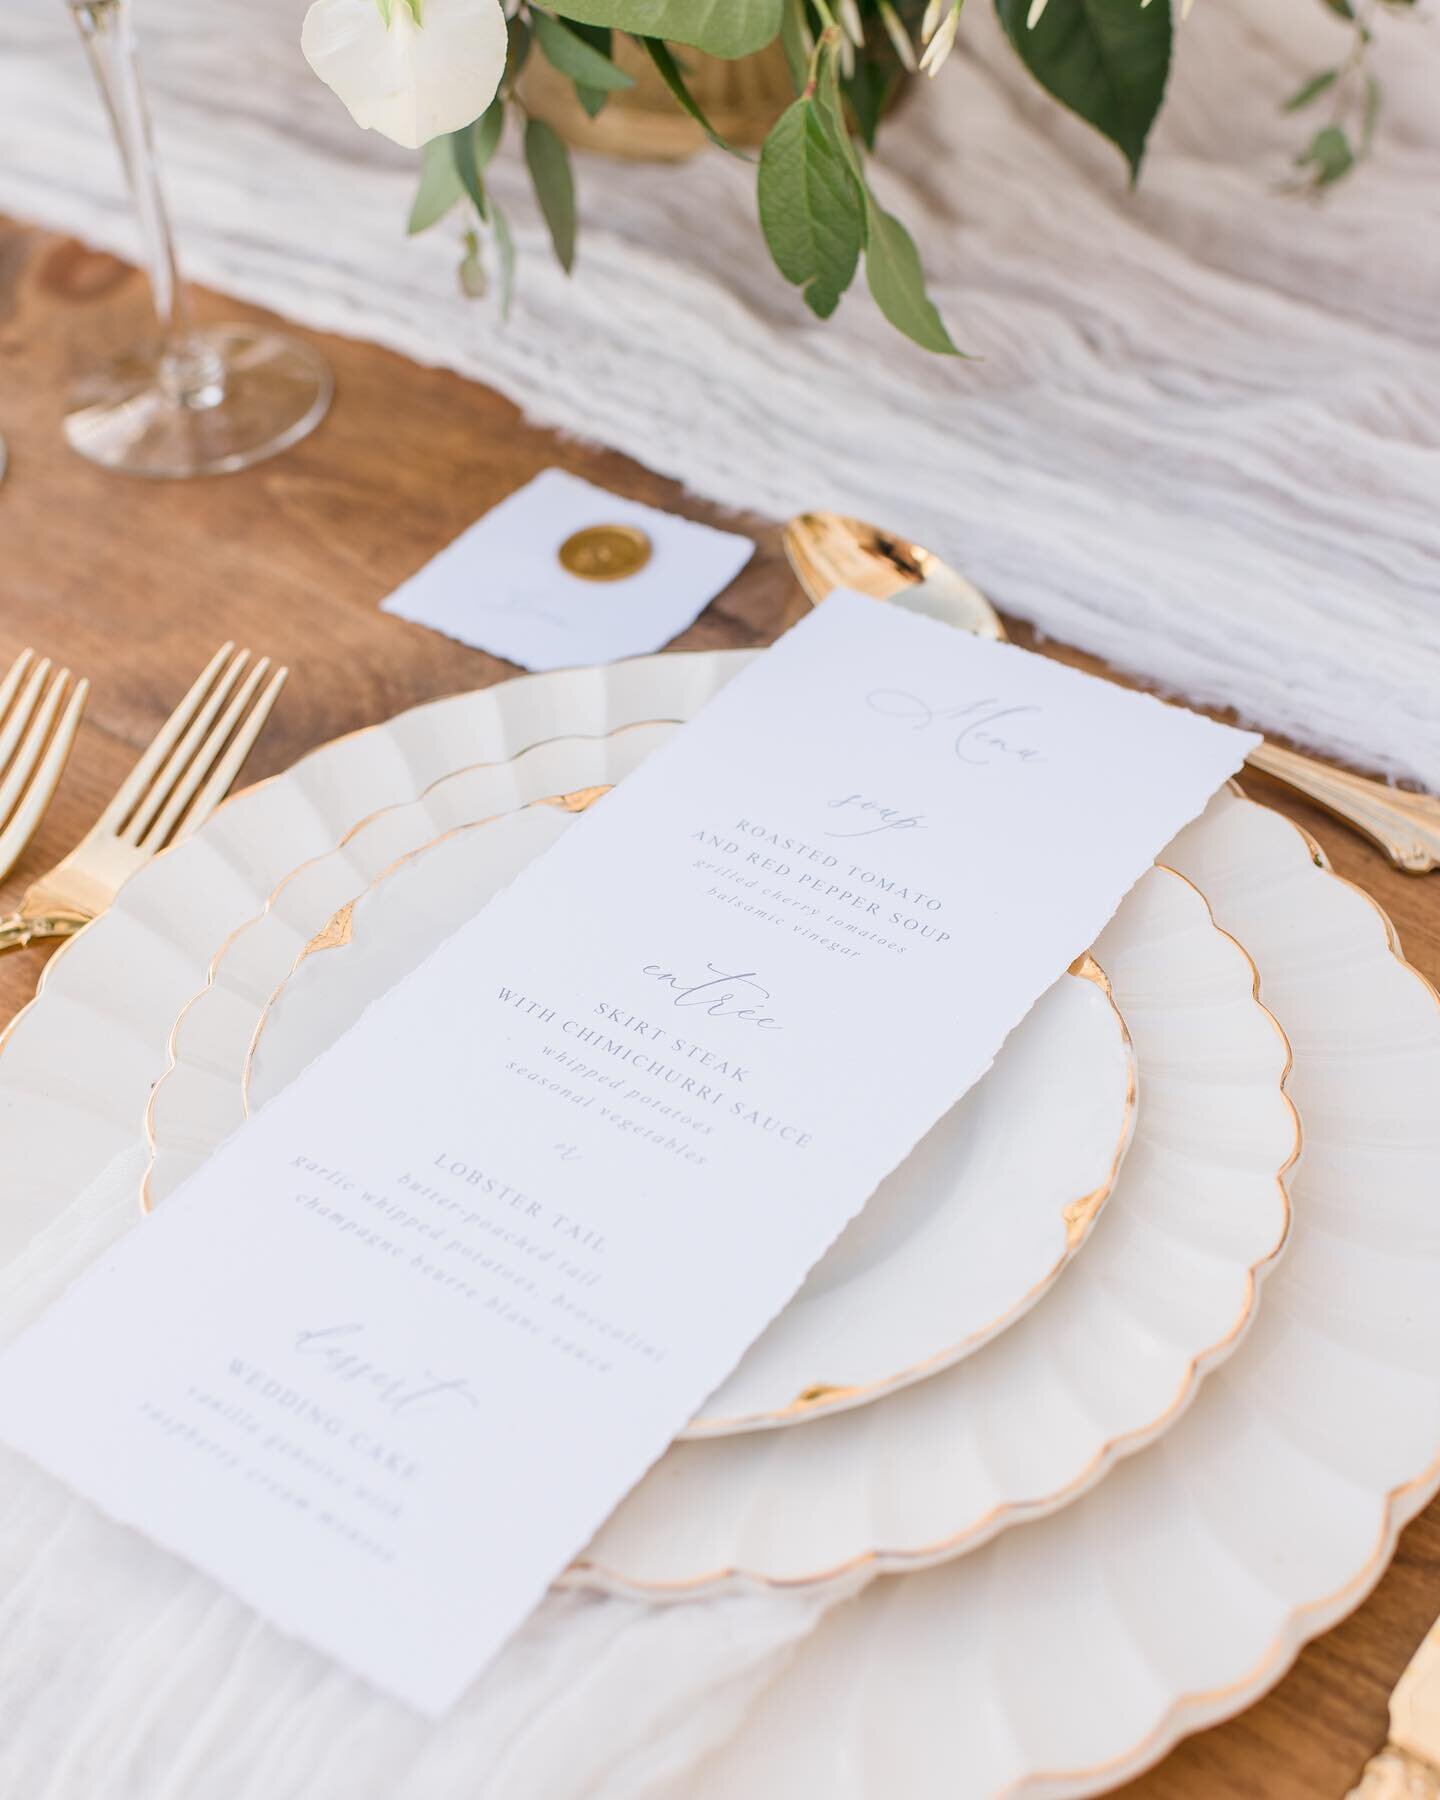 Classic cream plates, handmade deckled edge paper and gold vintage details. 😍 
So much texture and layers went into this tablescape design for a soft, elevated and romantic barn wedding. Do you love it too?